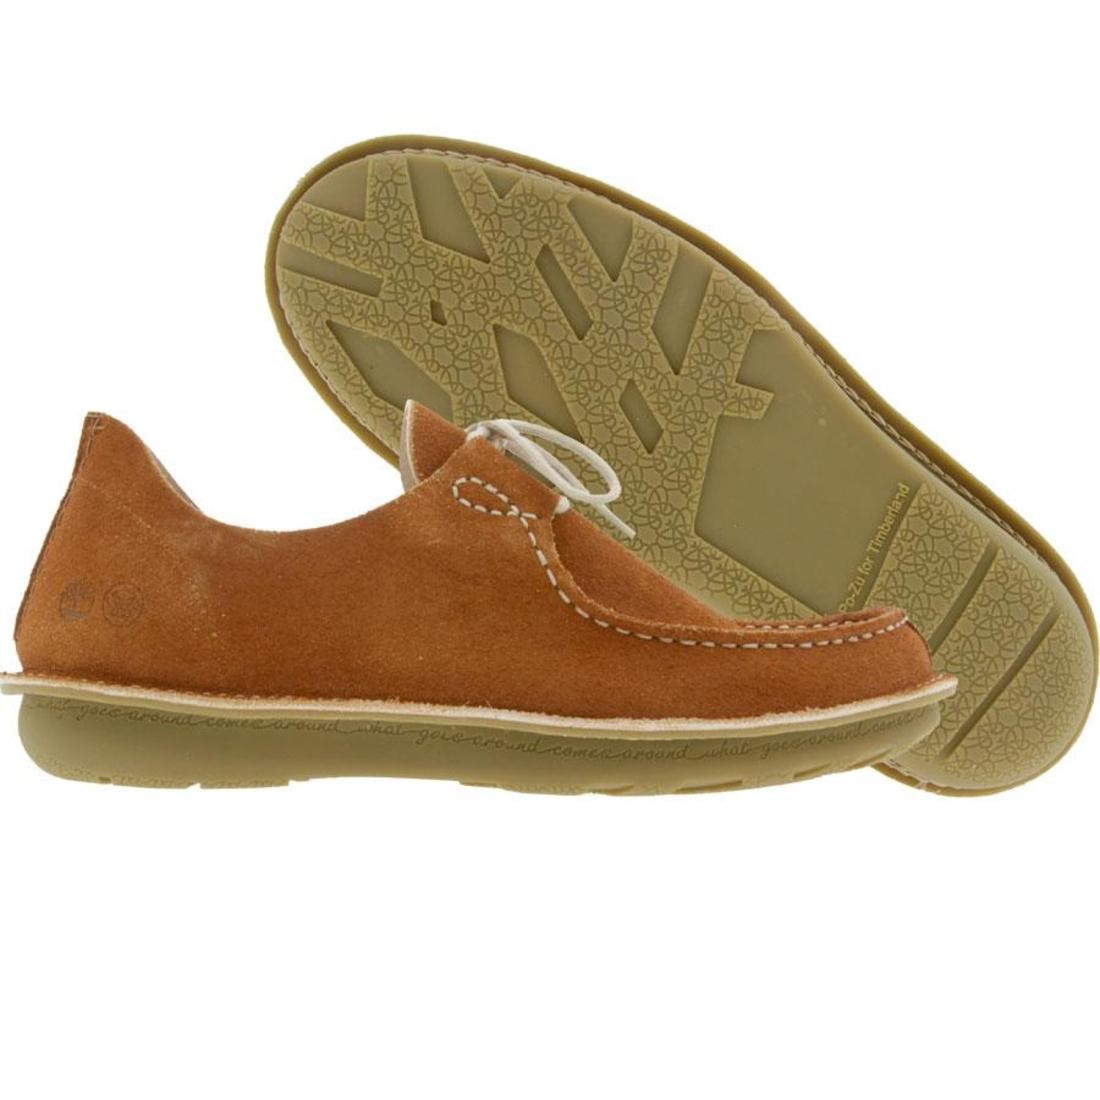 Timberland Pozu Moc Toe Oxford (rust suede brown)